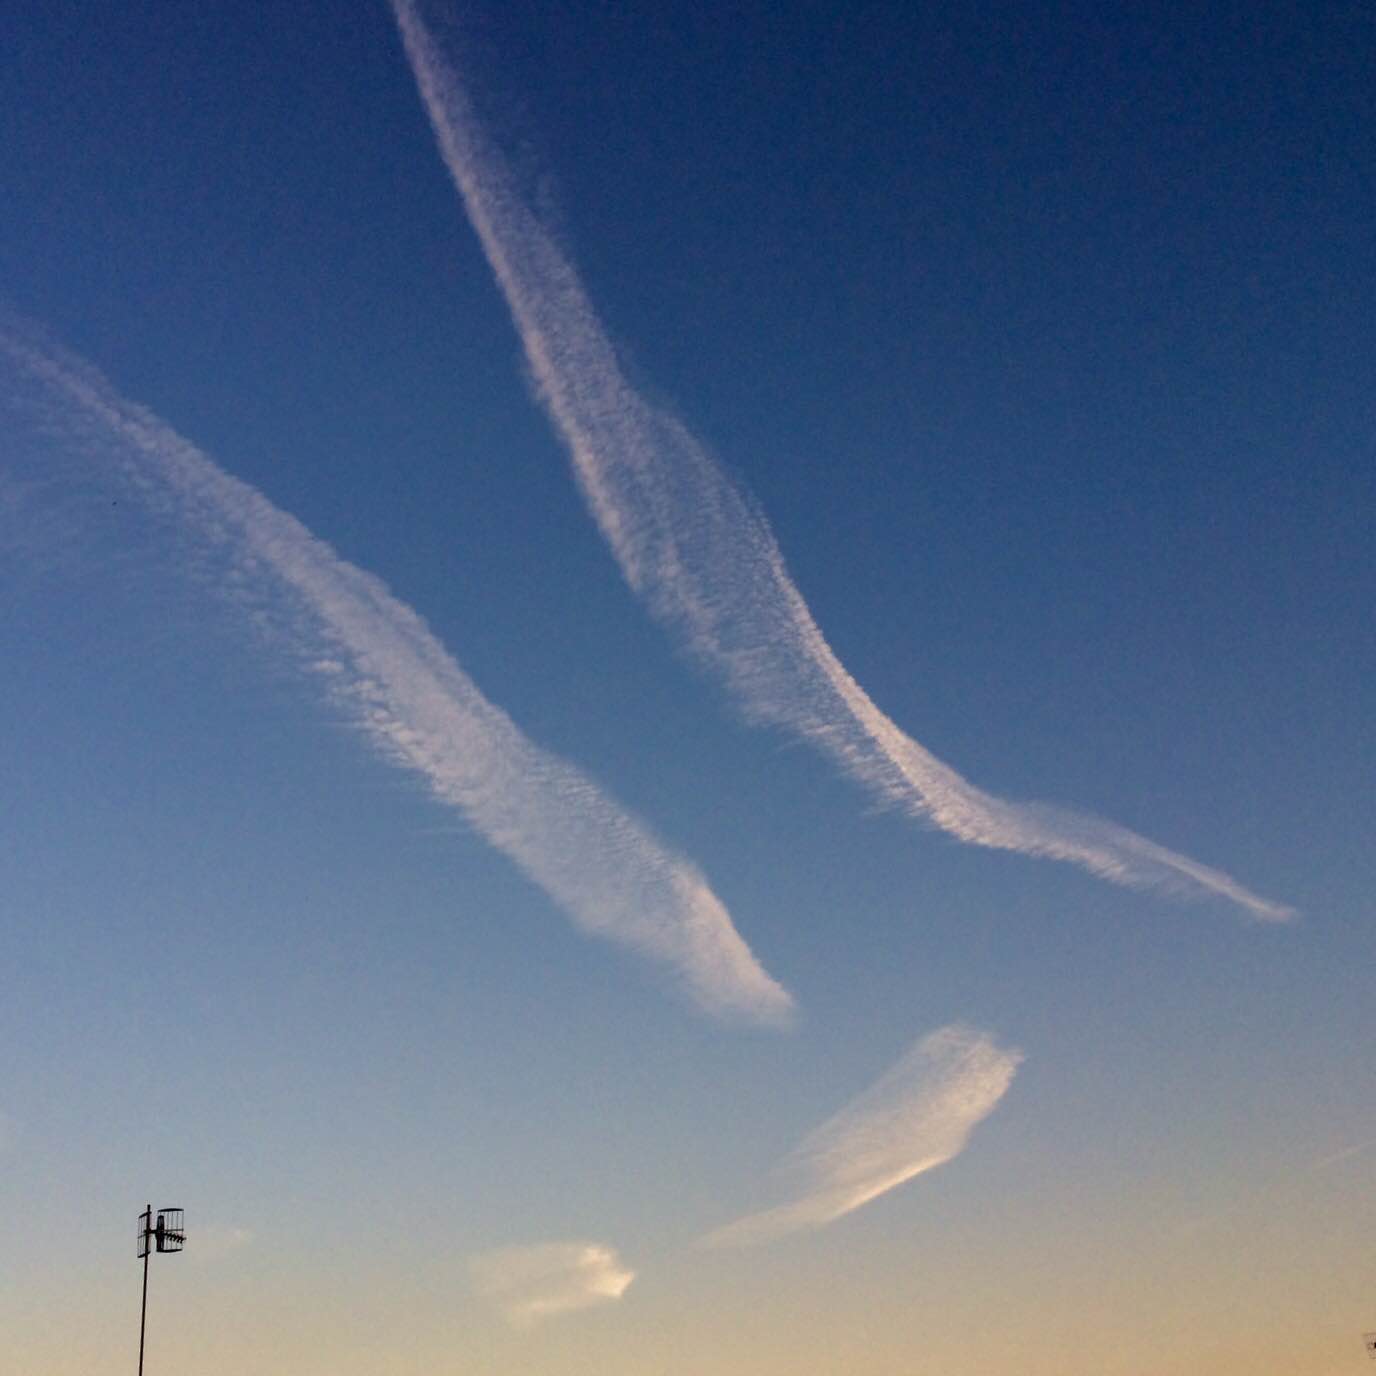 ANGEL WINGS IN THE SKY IMAGES